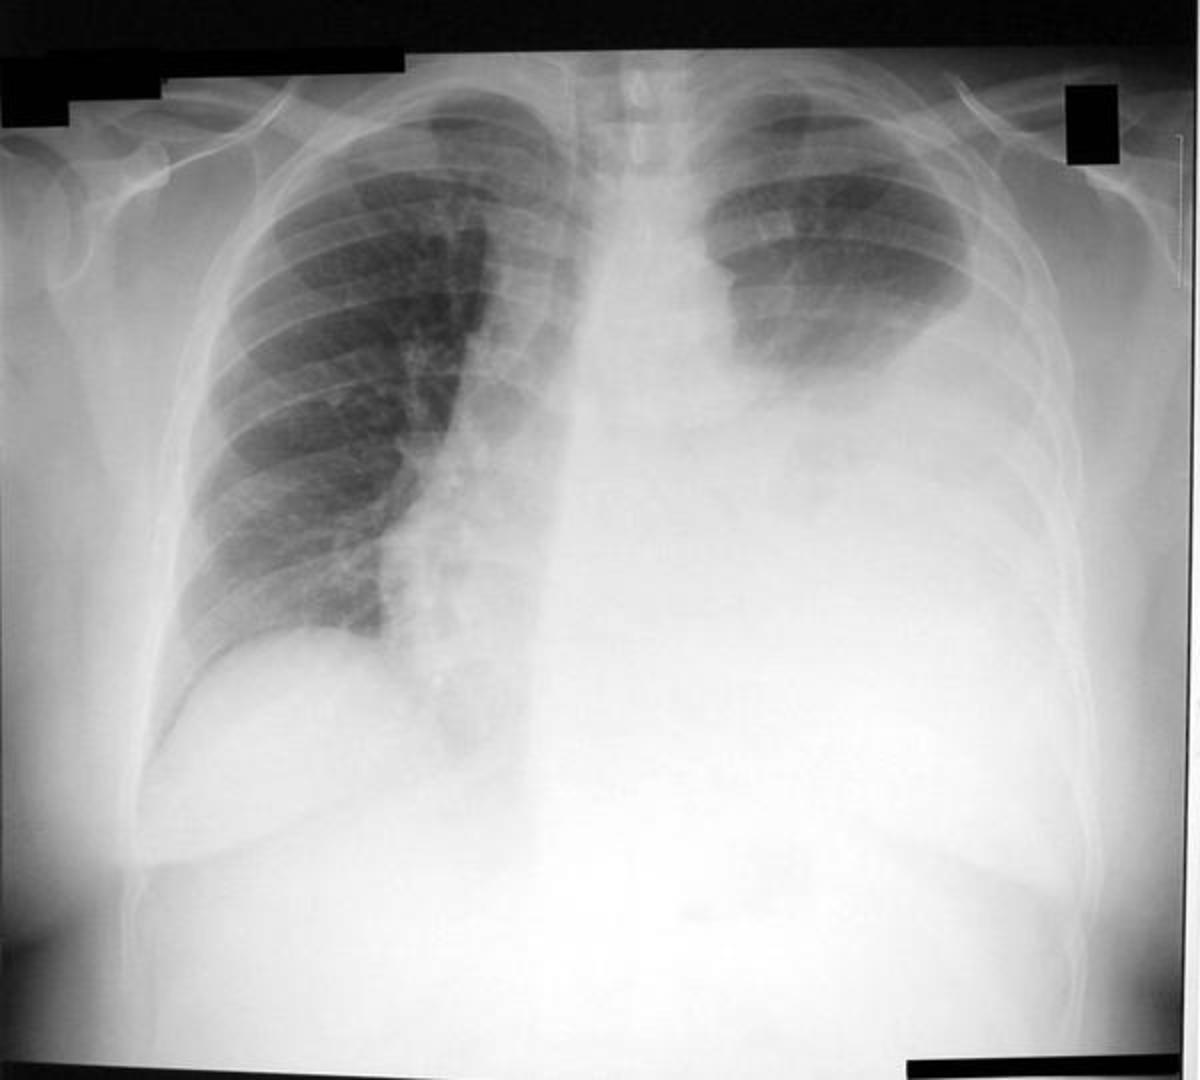 Sometimes an x-ray is taken while lying on the painful side. This may show fluid, as well as changes in fluid position, that did not appear in the vertical x-ray.